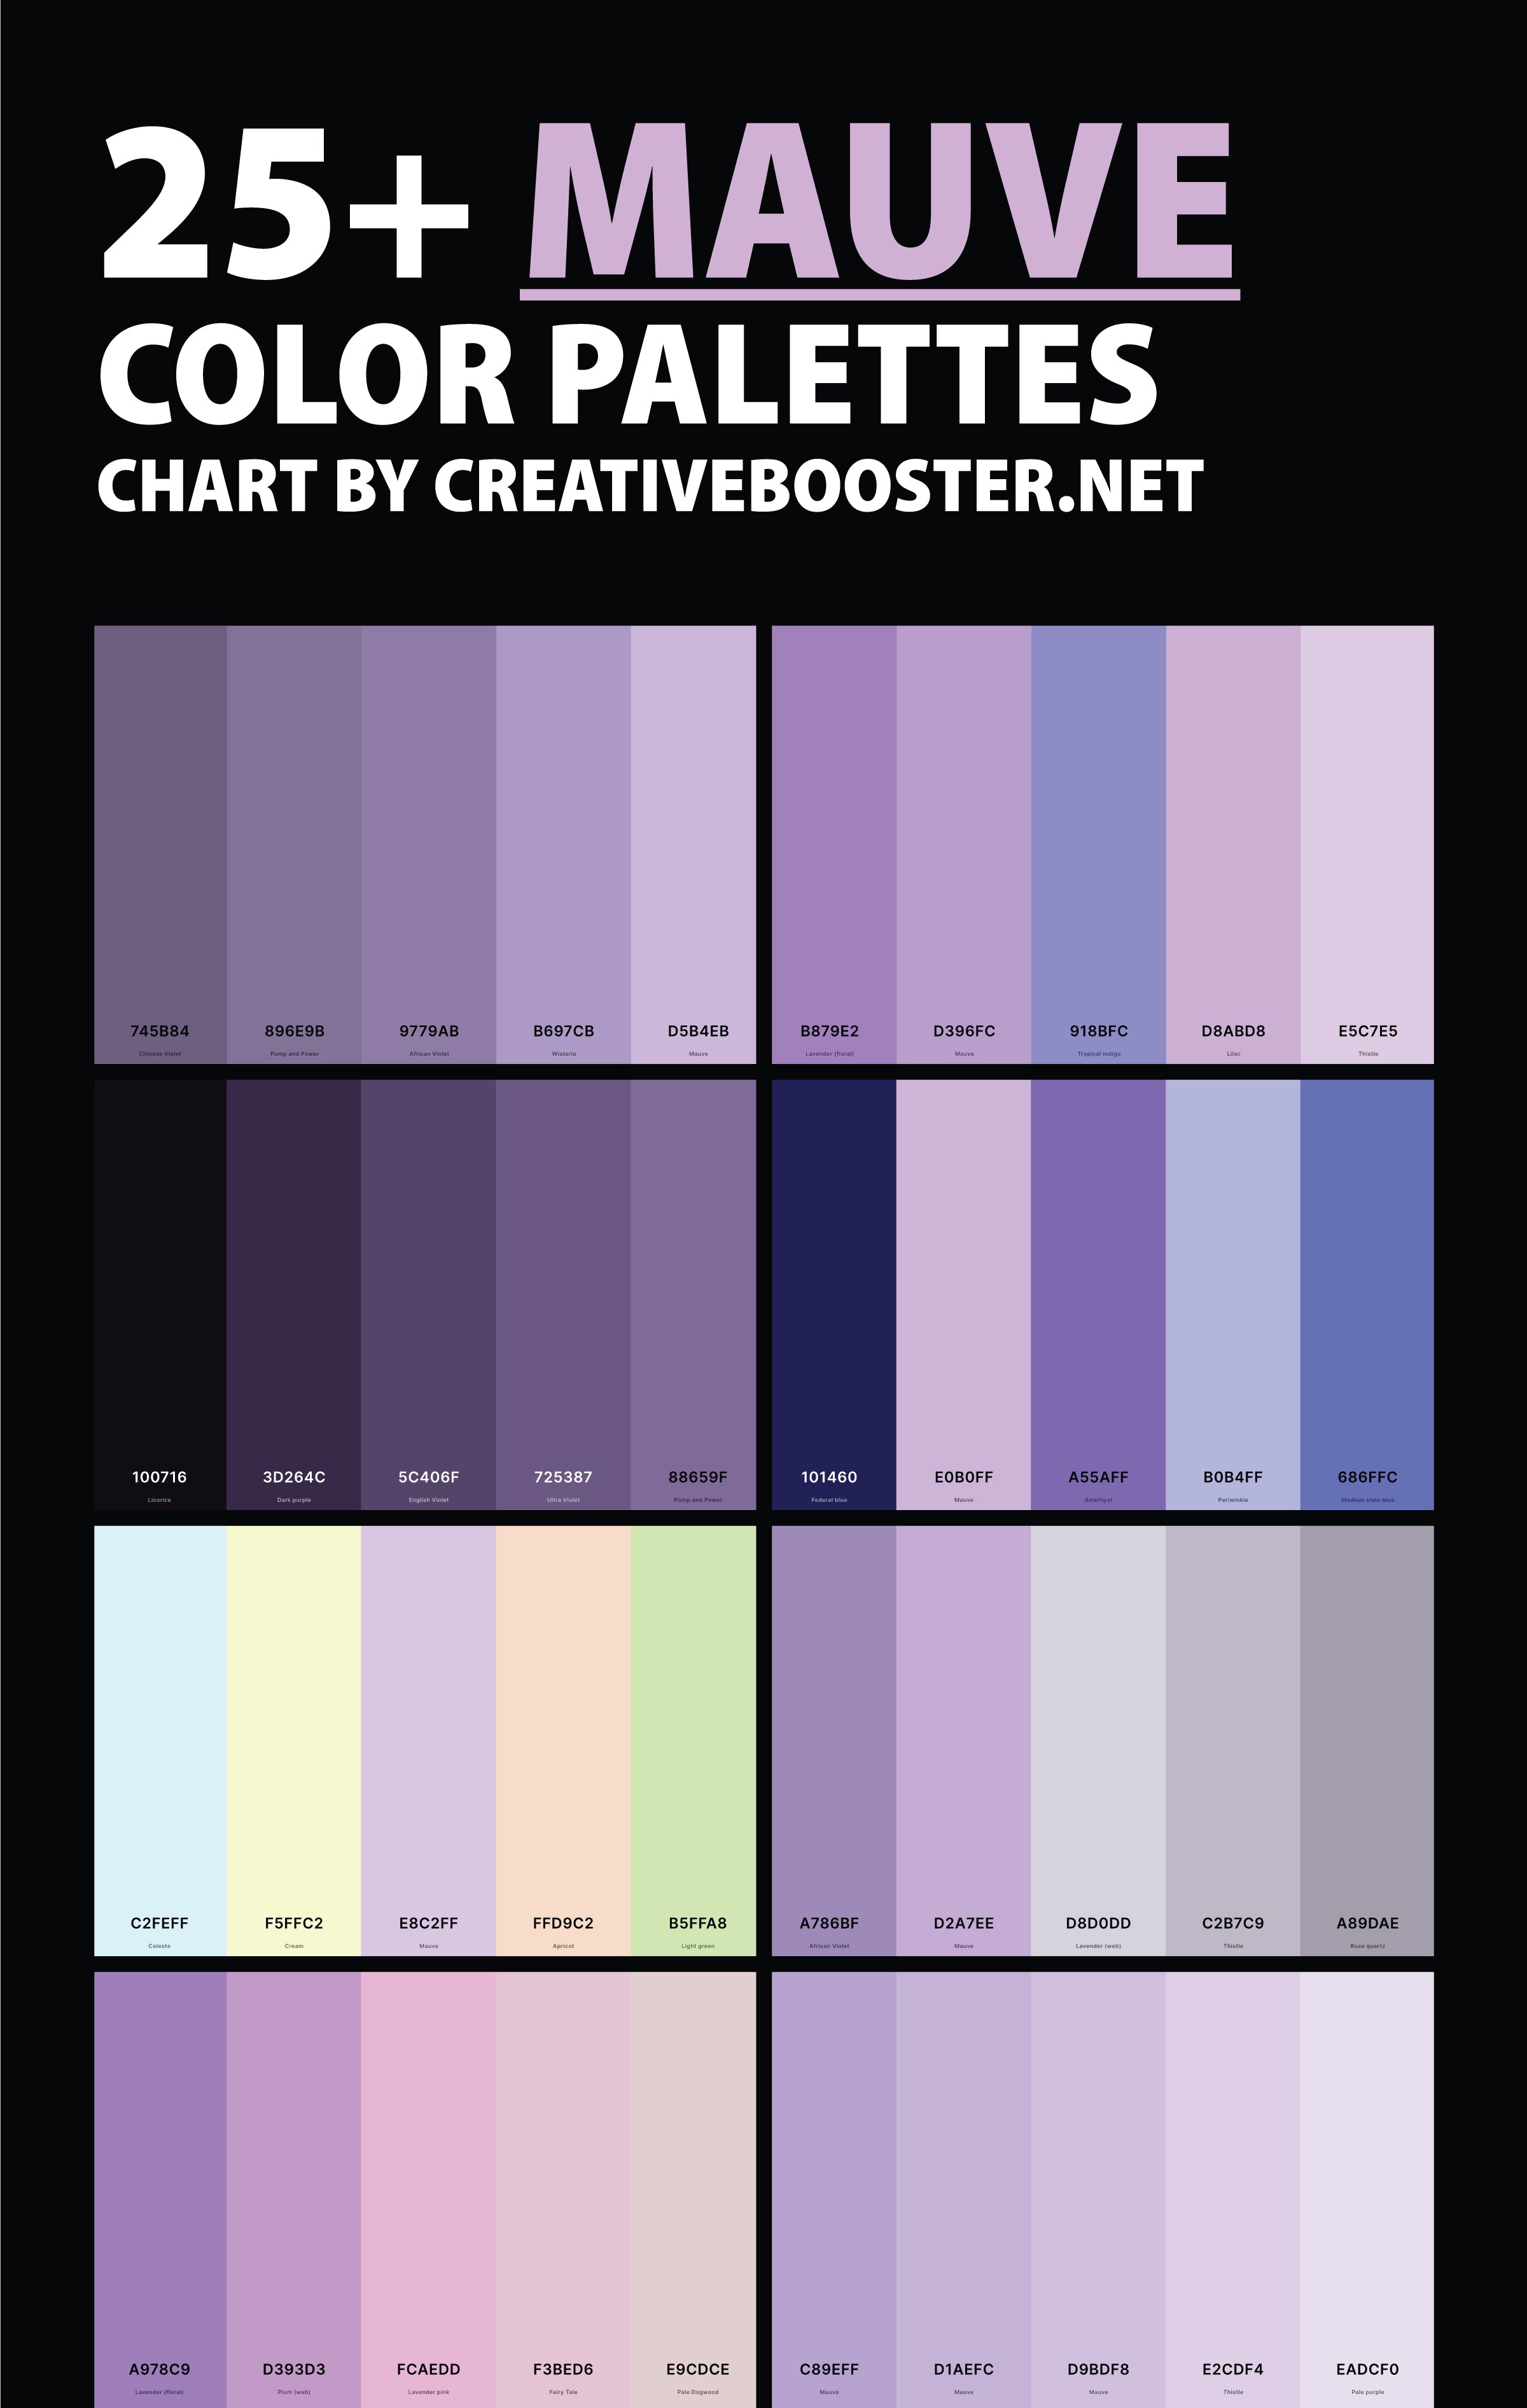 mauve-color-palettes-chart-with-names-and-hex-codes-pinterest